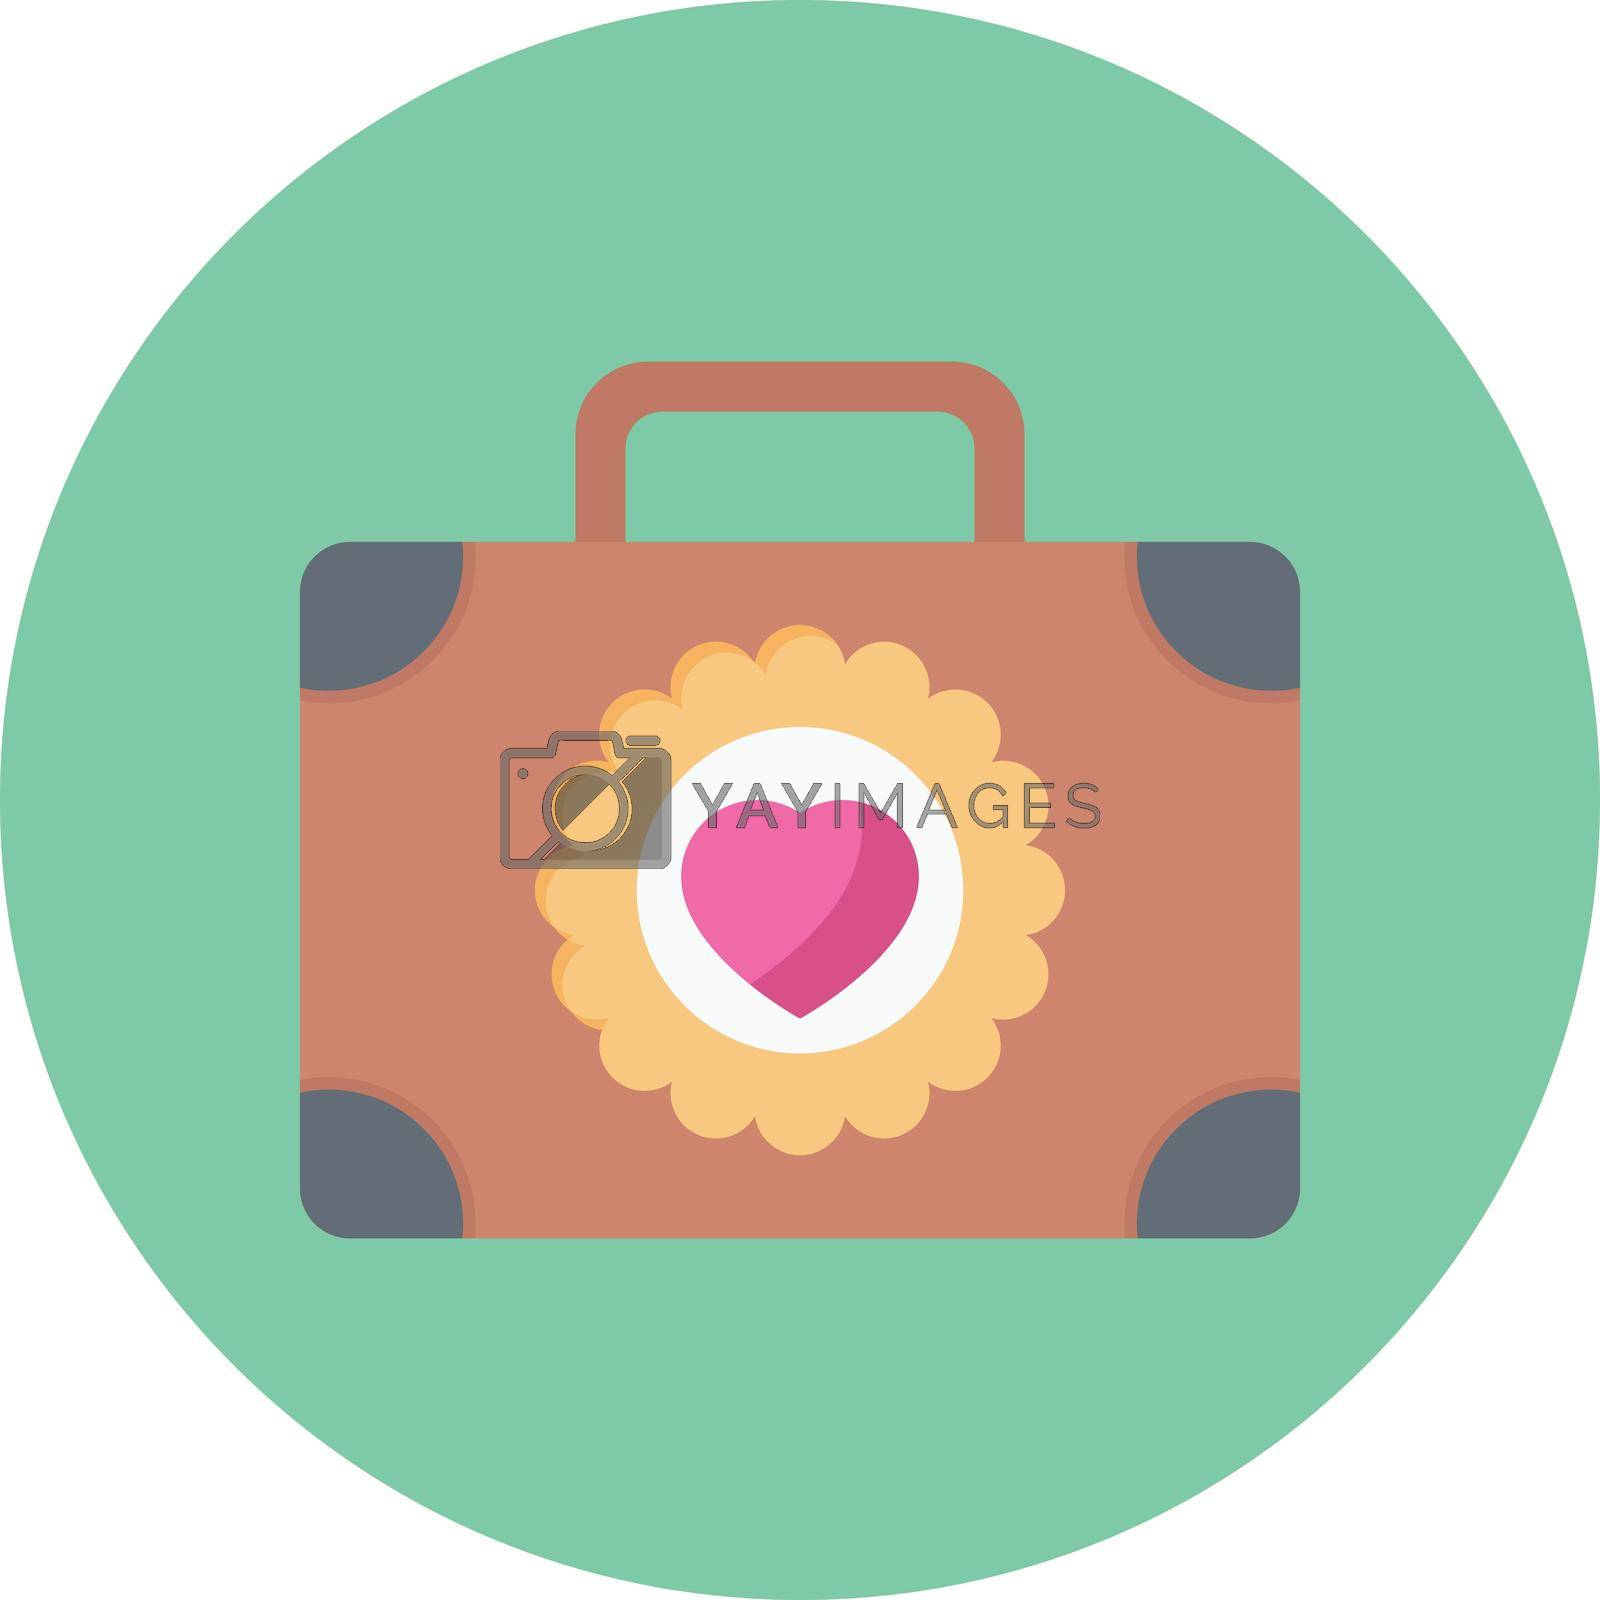 Royalty free image of briefcase by vectorstall